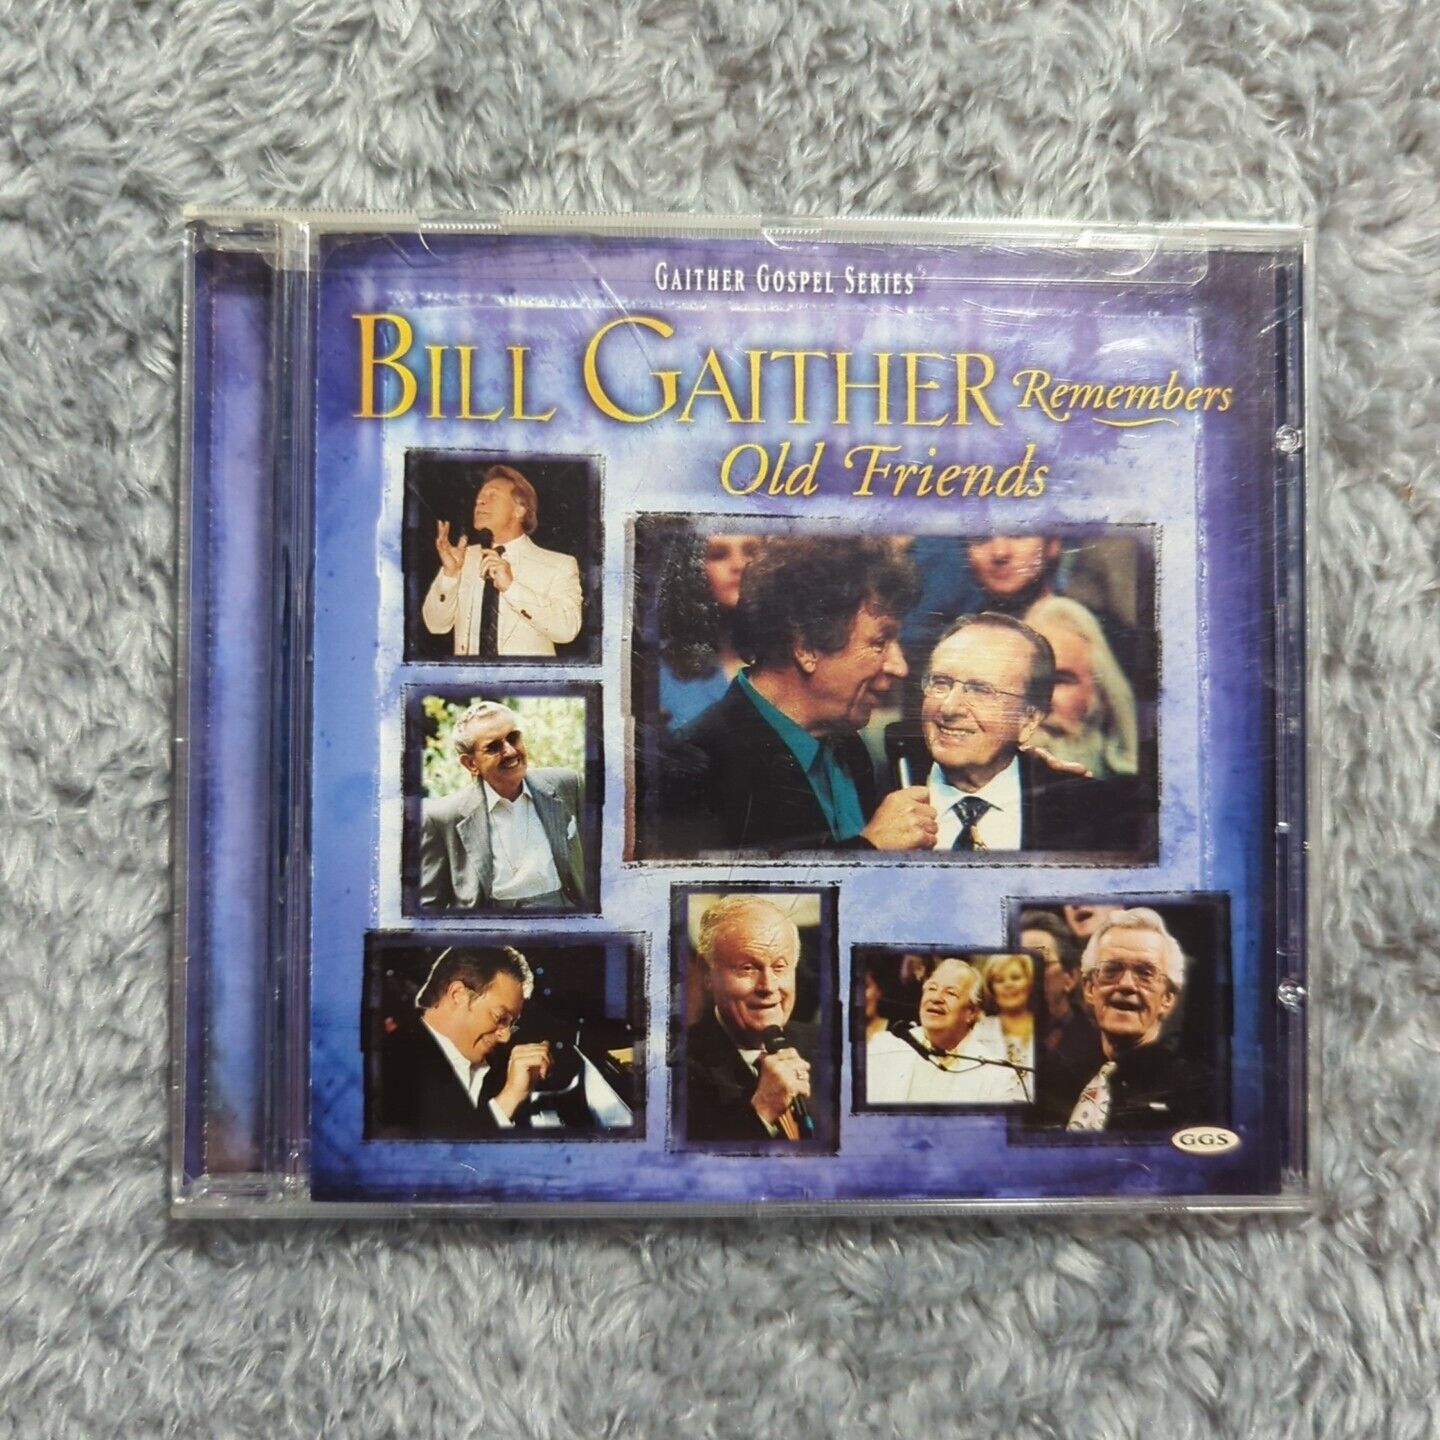 Bill Gaither Remembers Old Friends by Bill Gaither (Gospel) (CD, Jul-2006,...